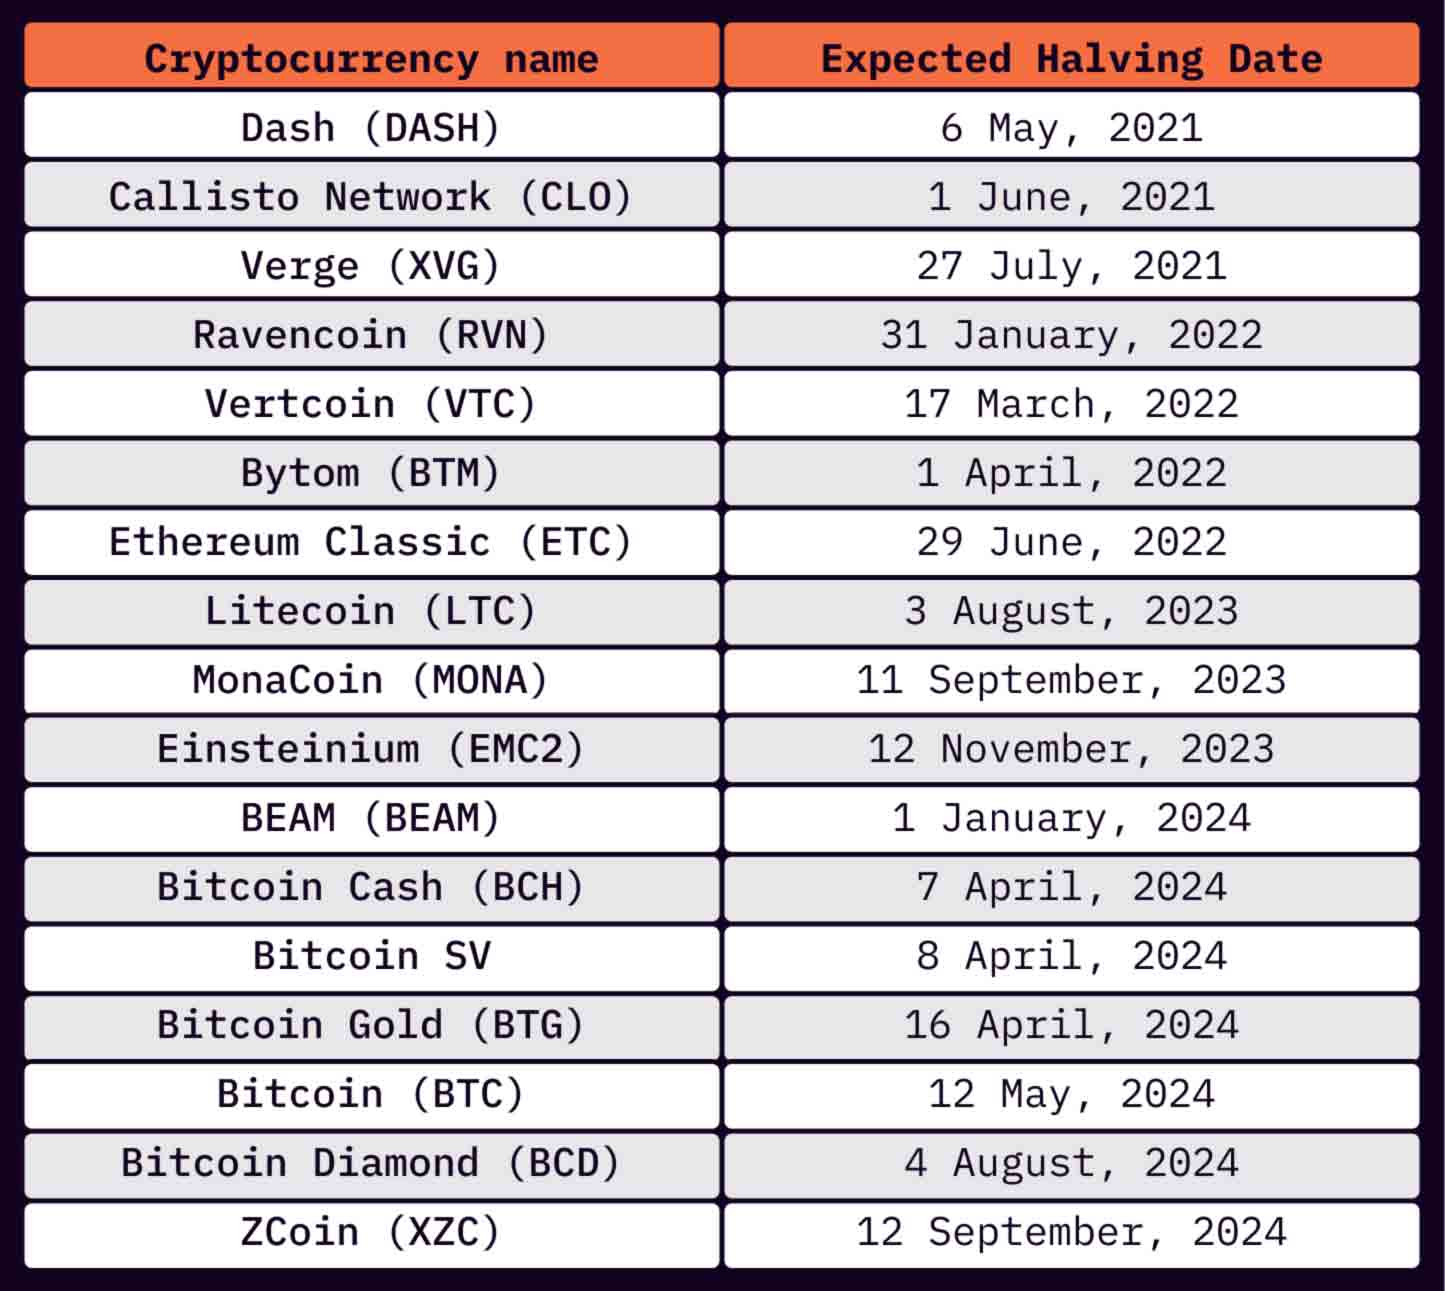 What Is Crypto Halving?